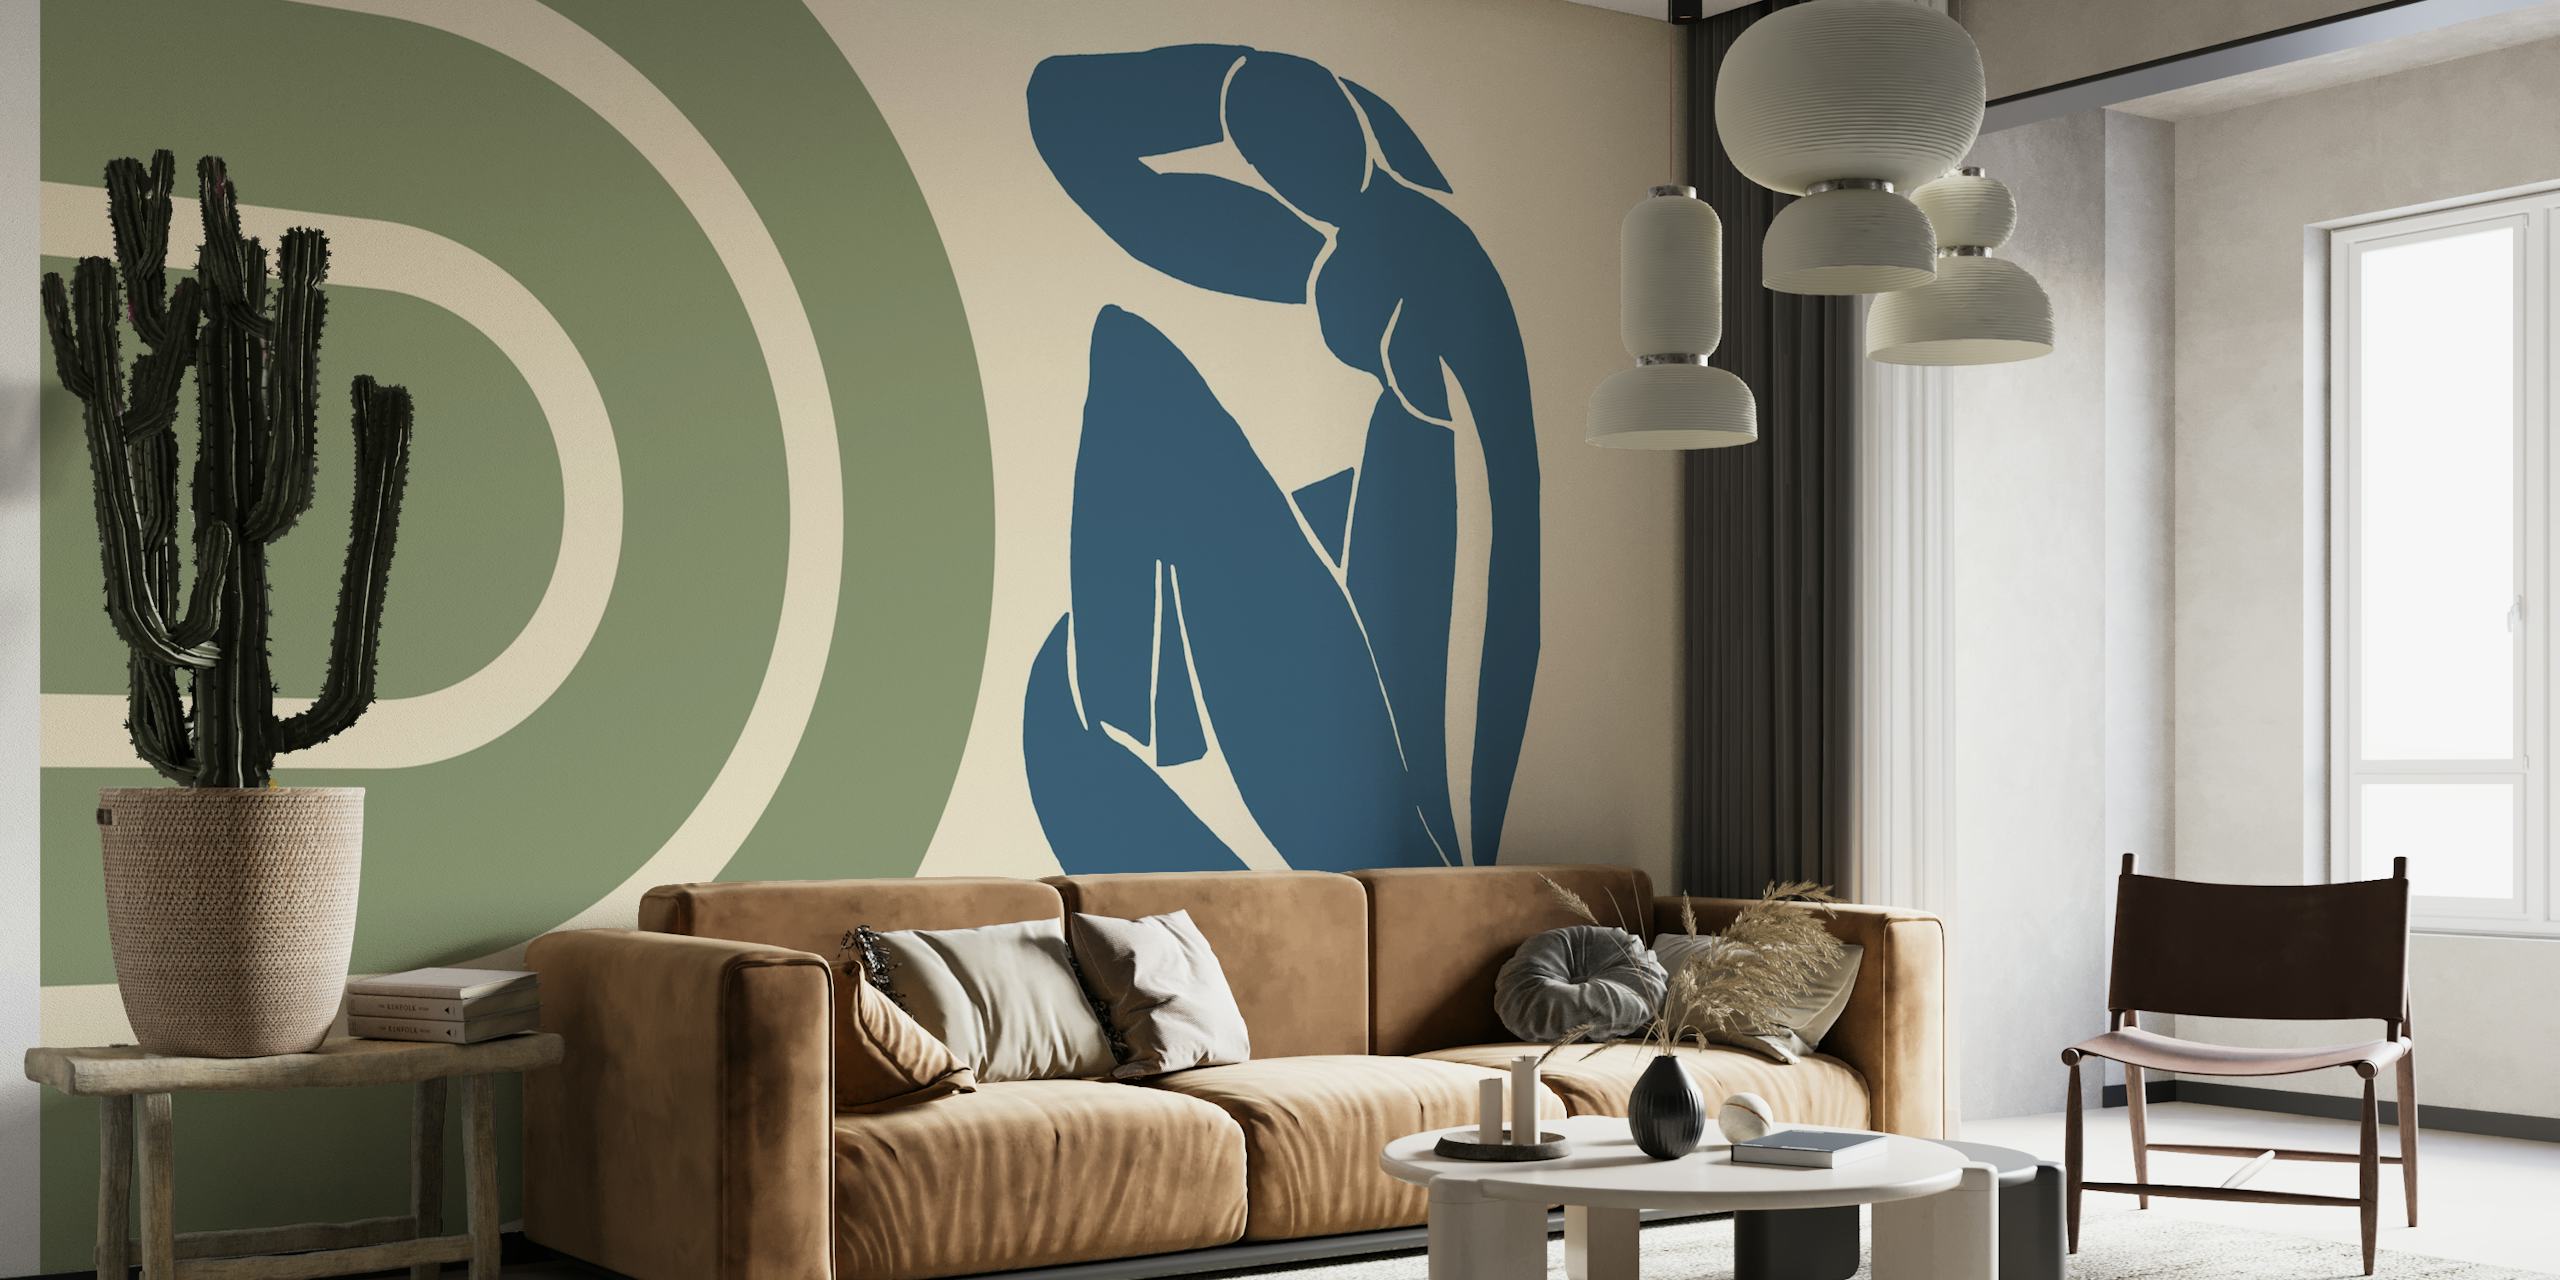 Green Mid-Century style wall mural featuring retro patterns and a stylized human figure